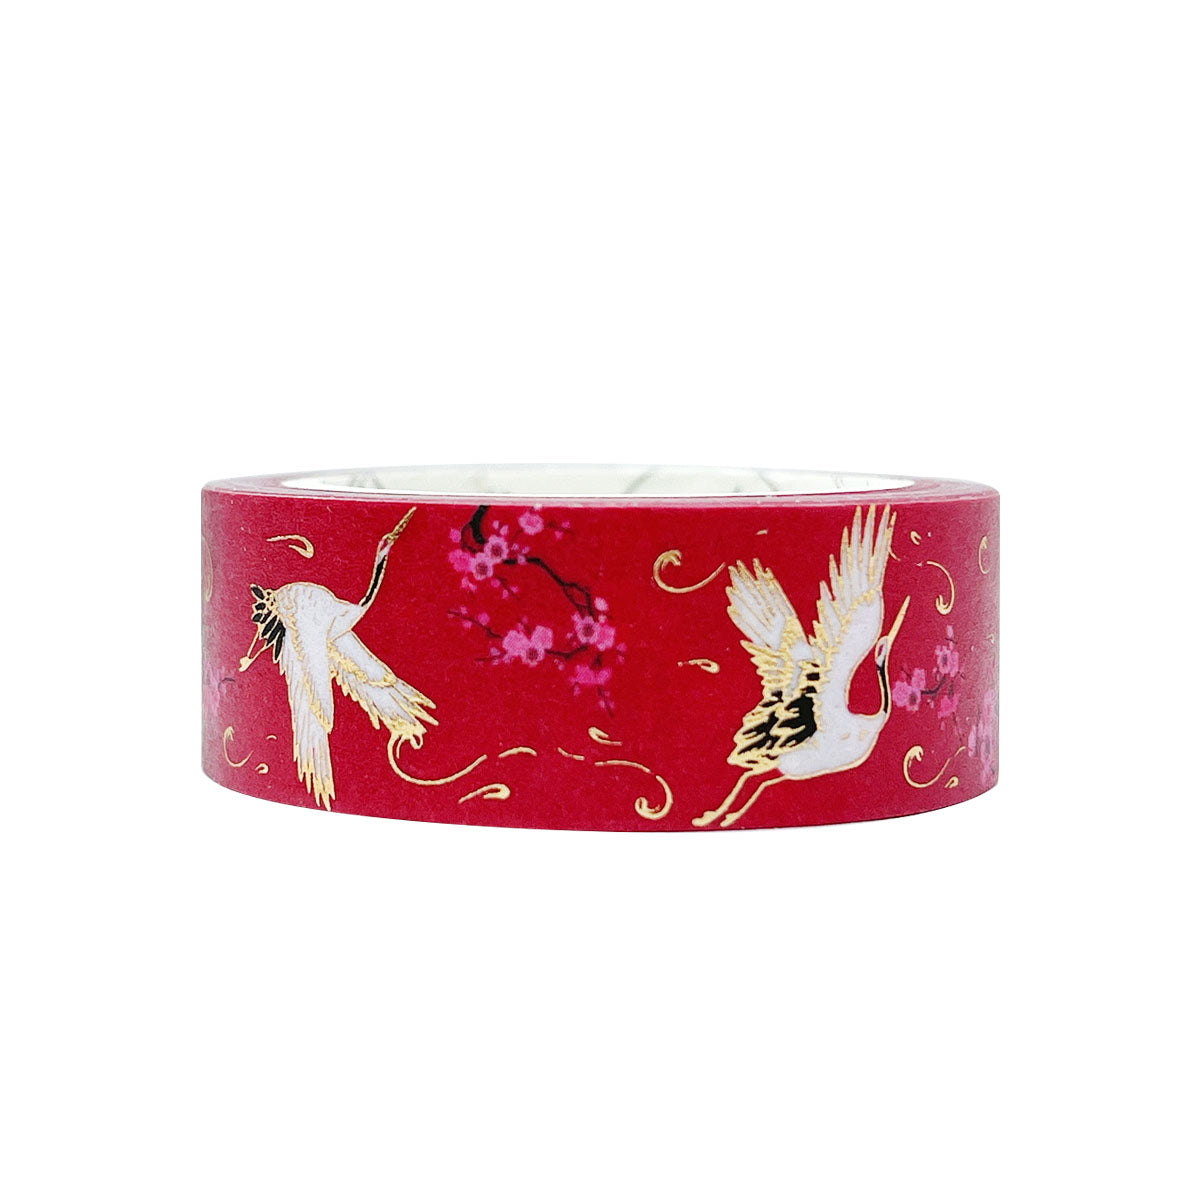 Wrapables Poetic Picturesque Gold Foil Washi Masking Tape, 15mm x